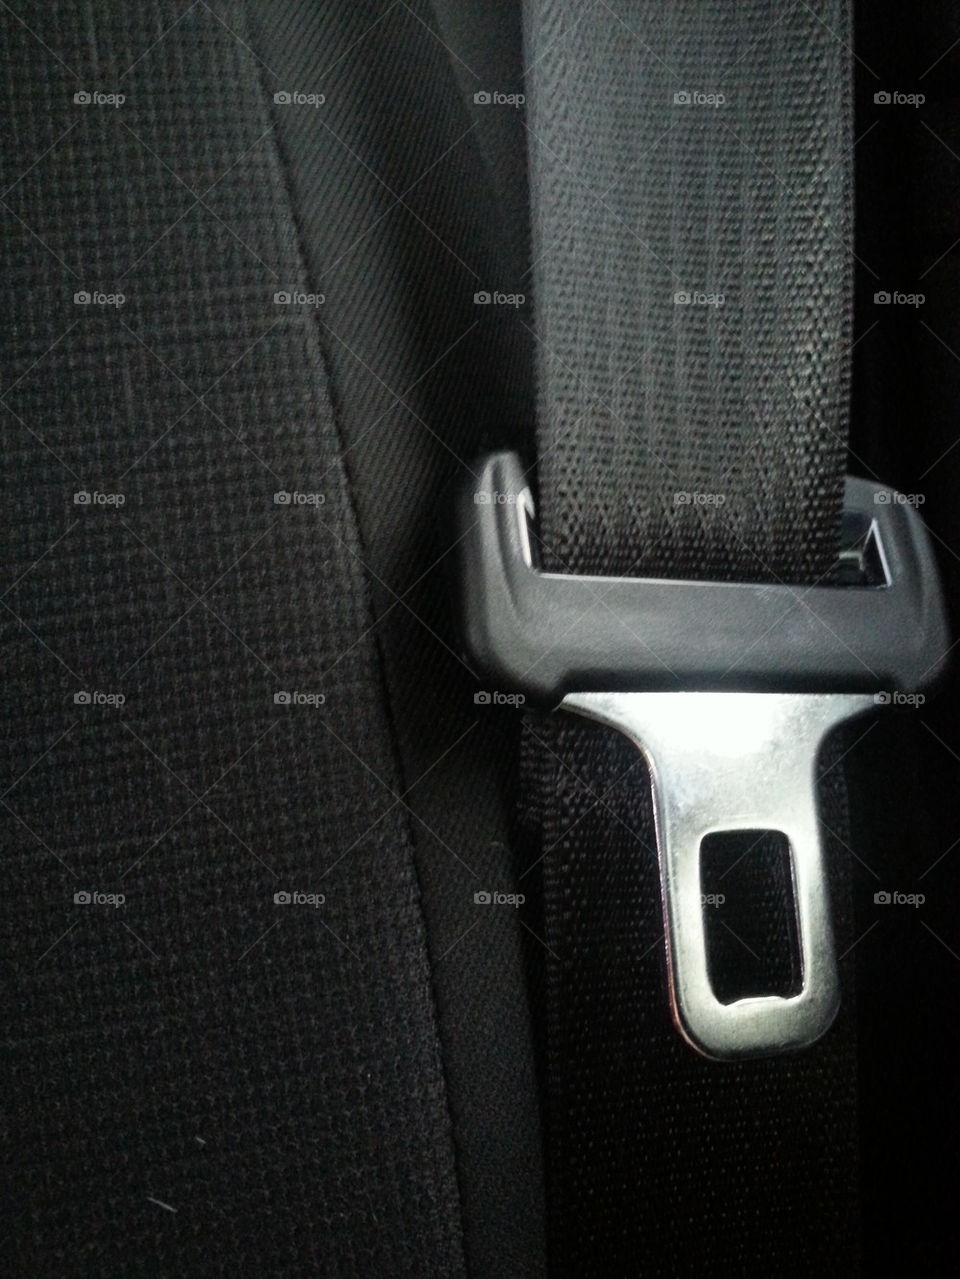 buckle up- it could save your life